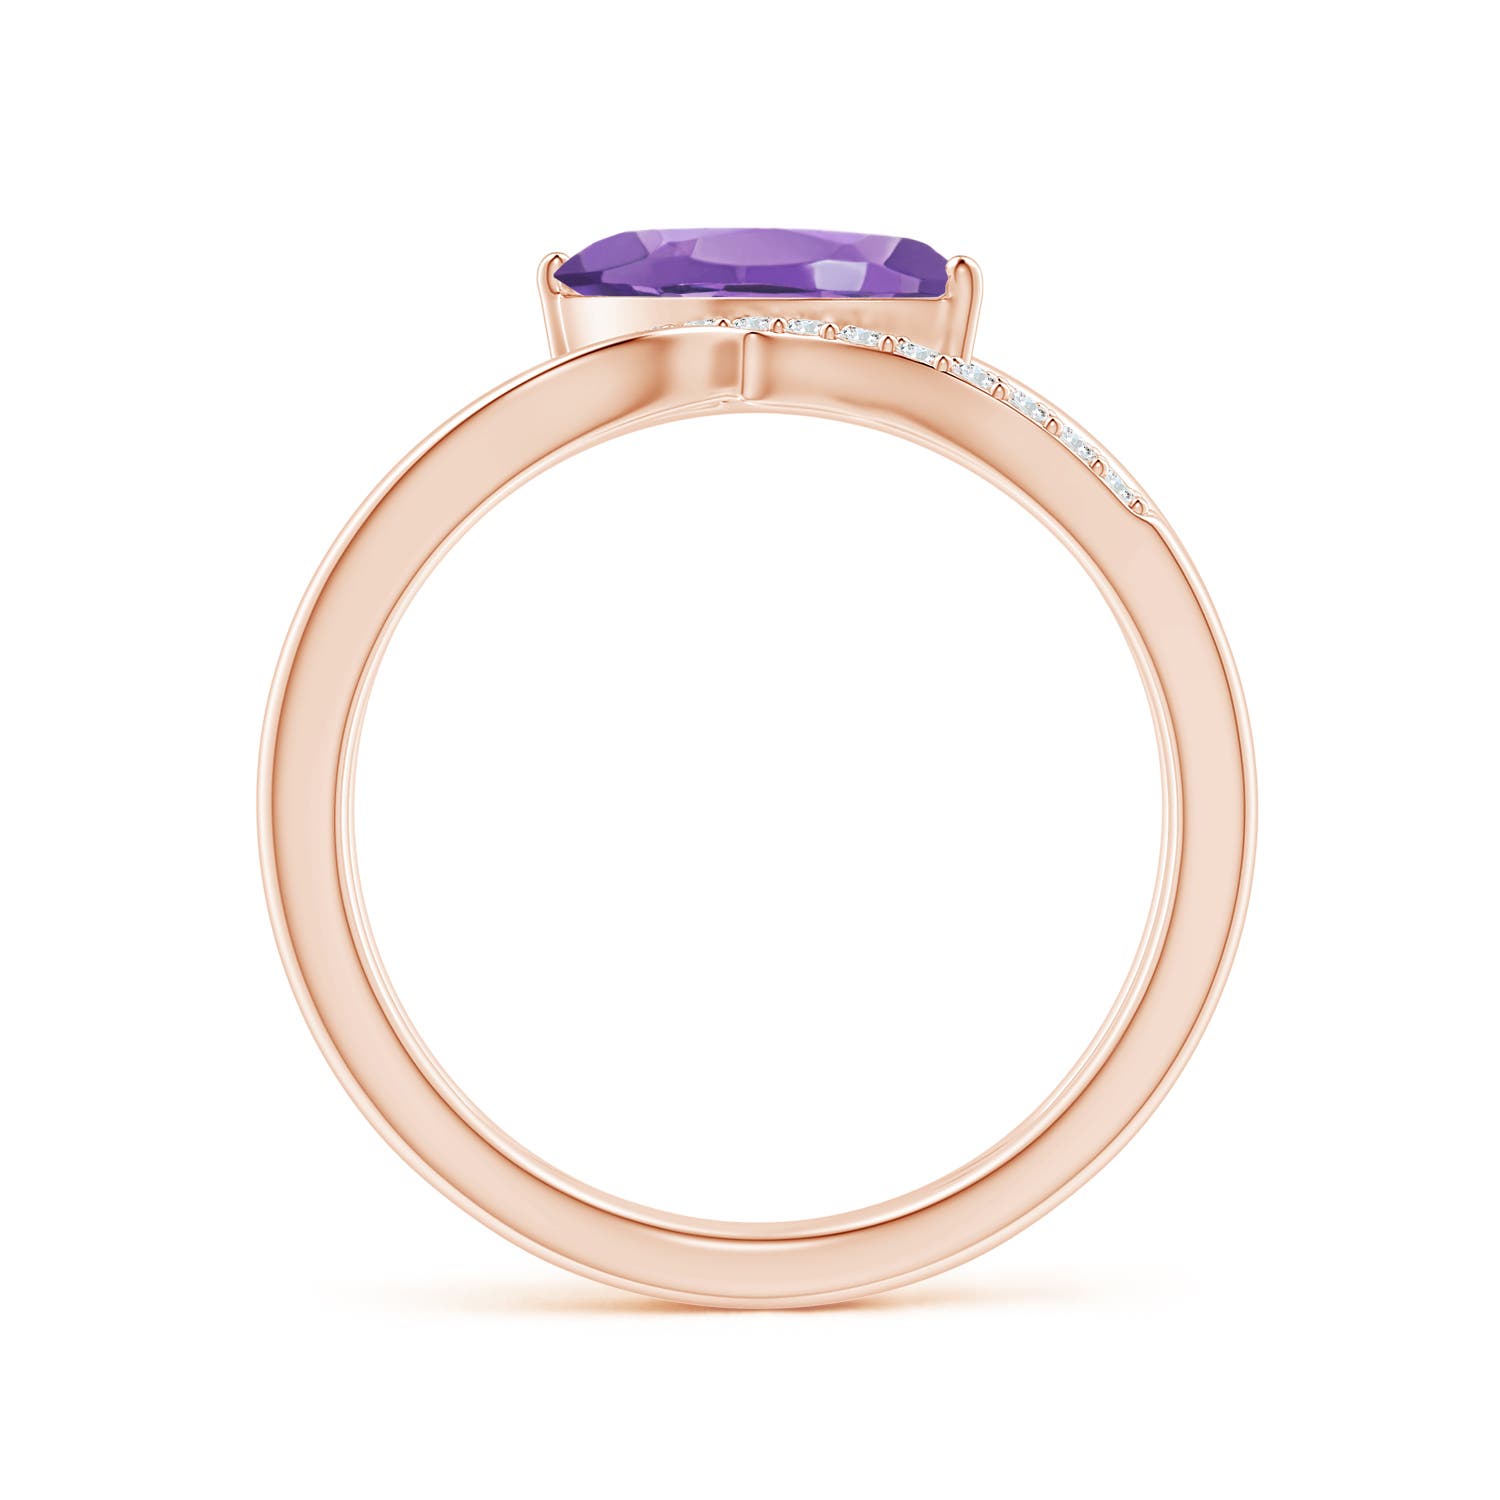 AA - Amethyst / 1.13 CT / 14 KT Rose Gold